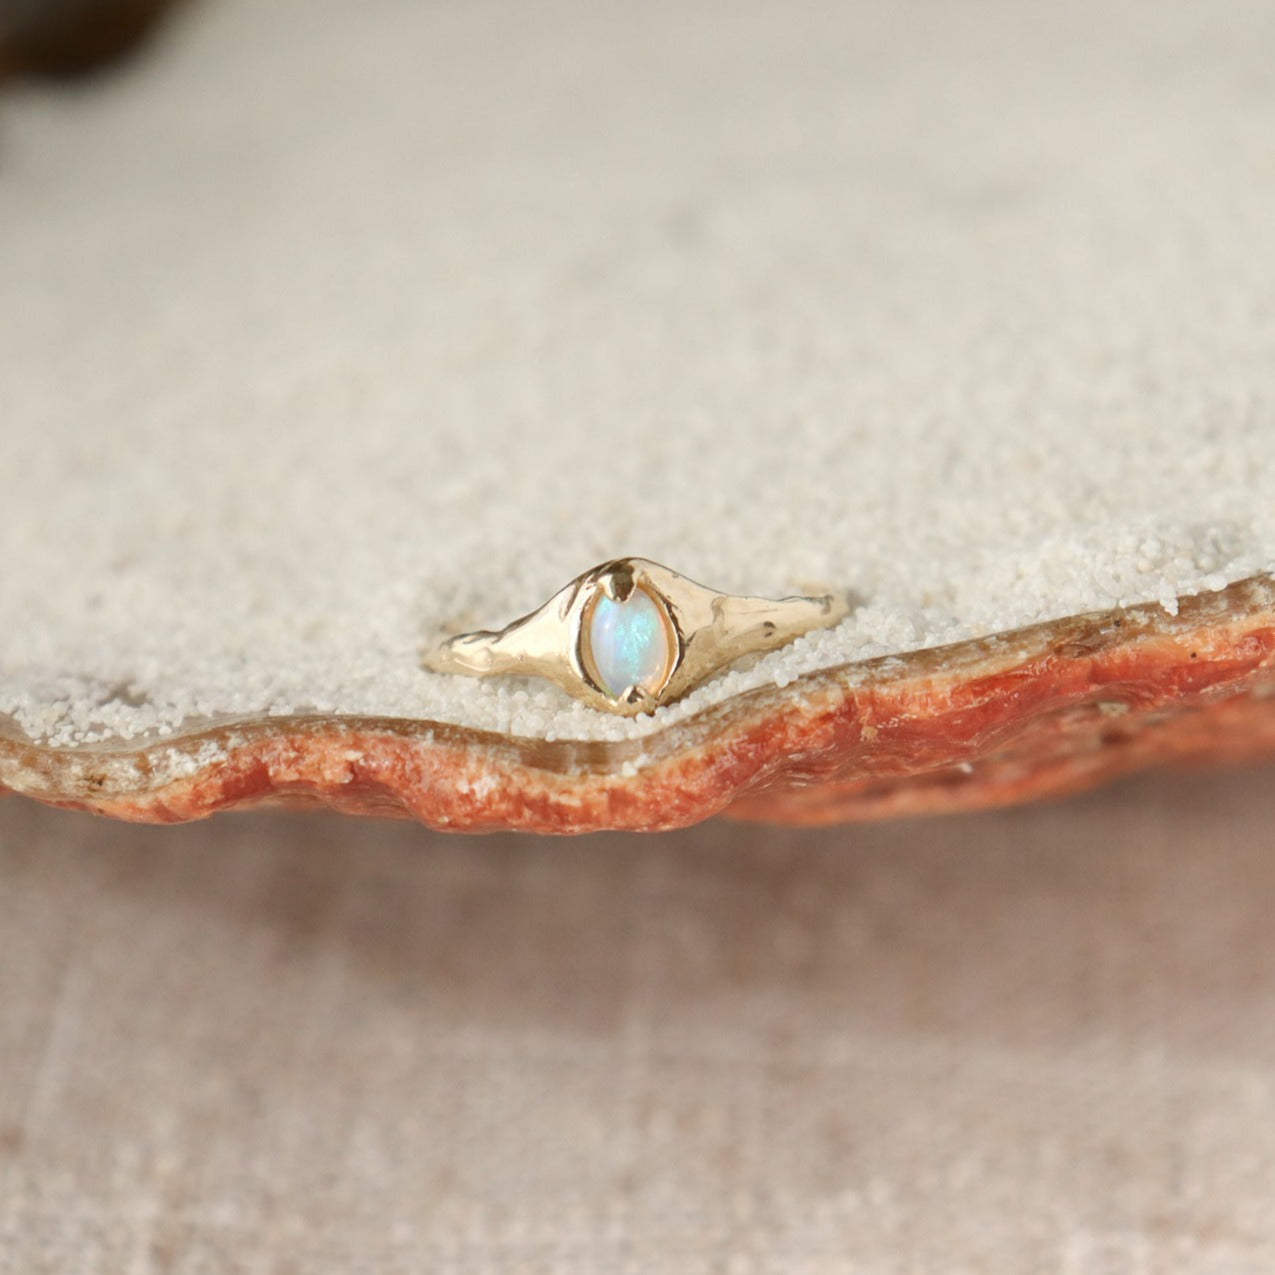 A small oval opal ring is set with prongs on an organically crafted 14k gold band.